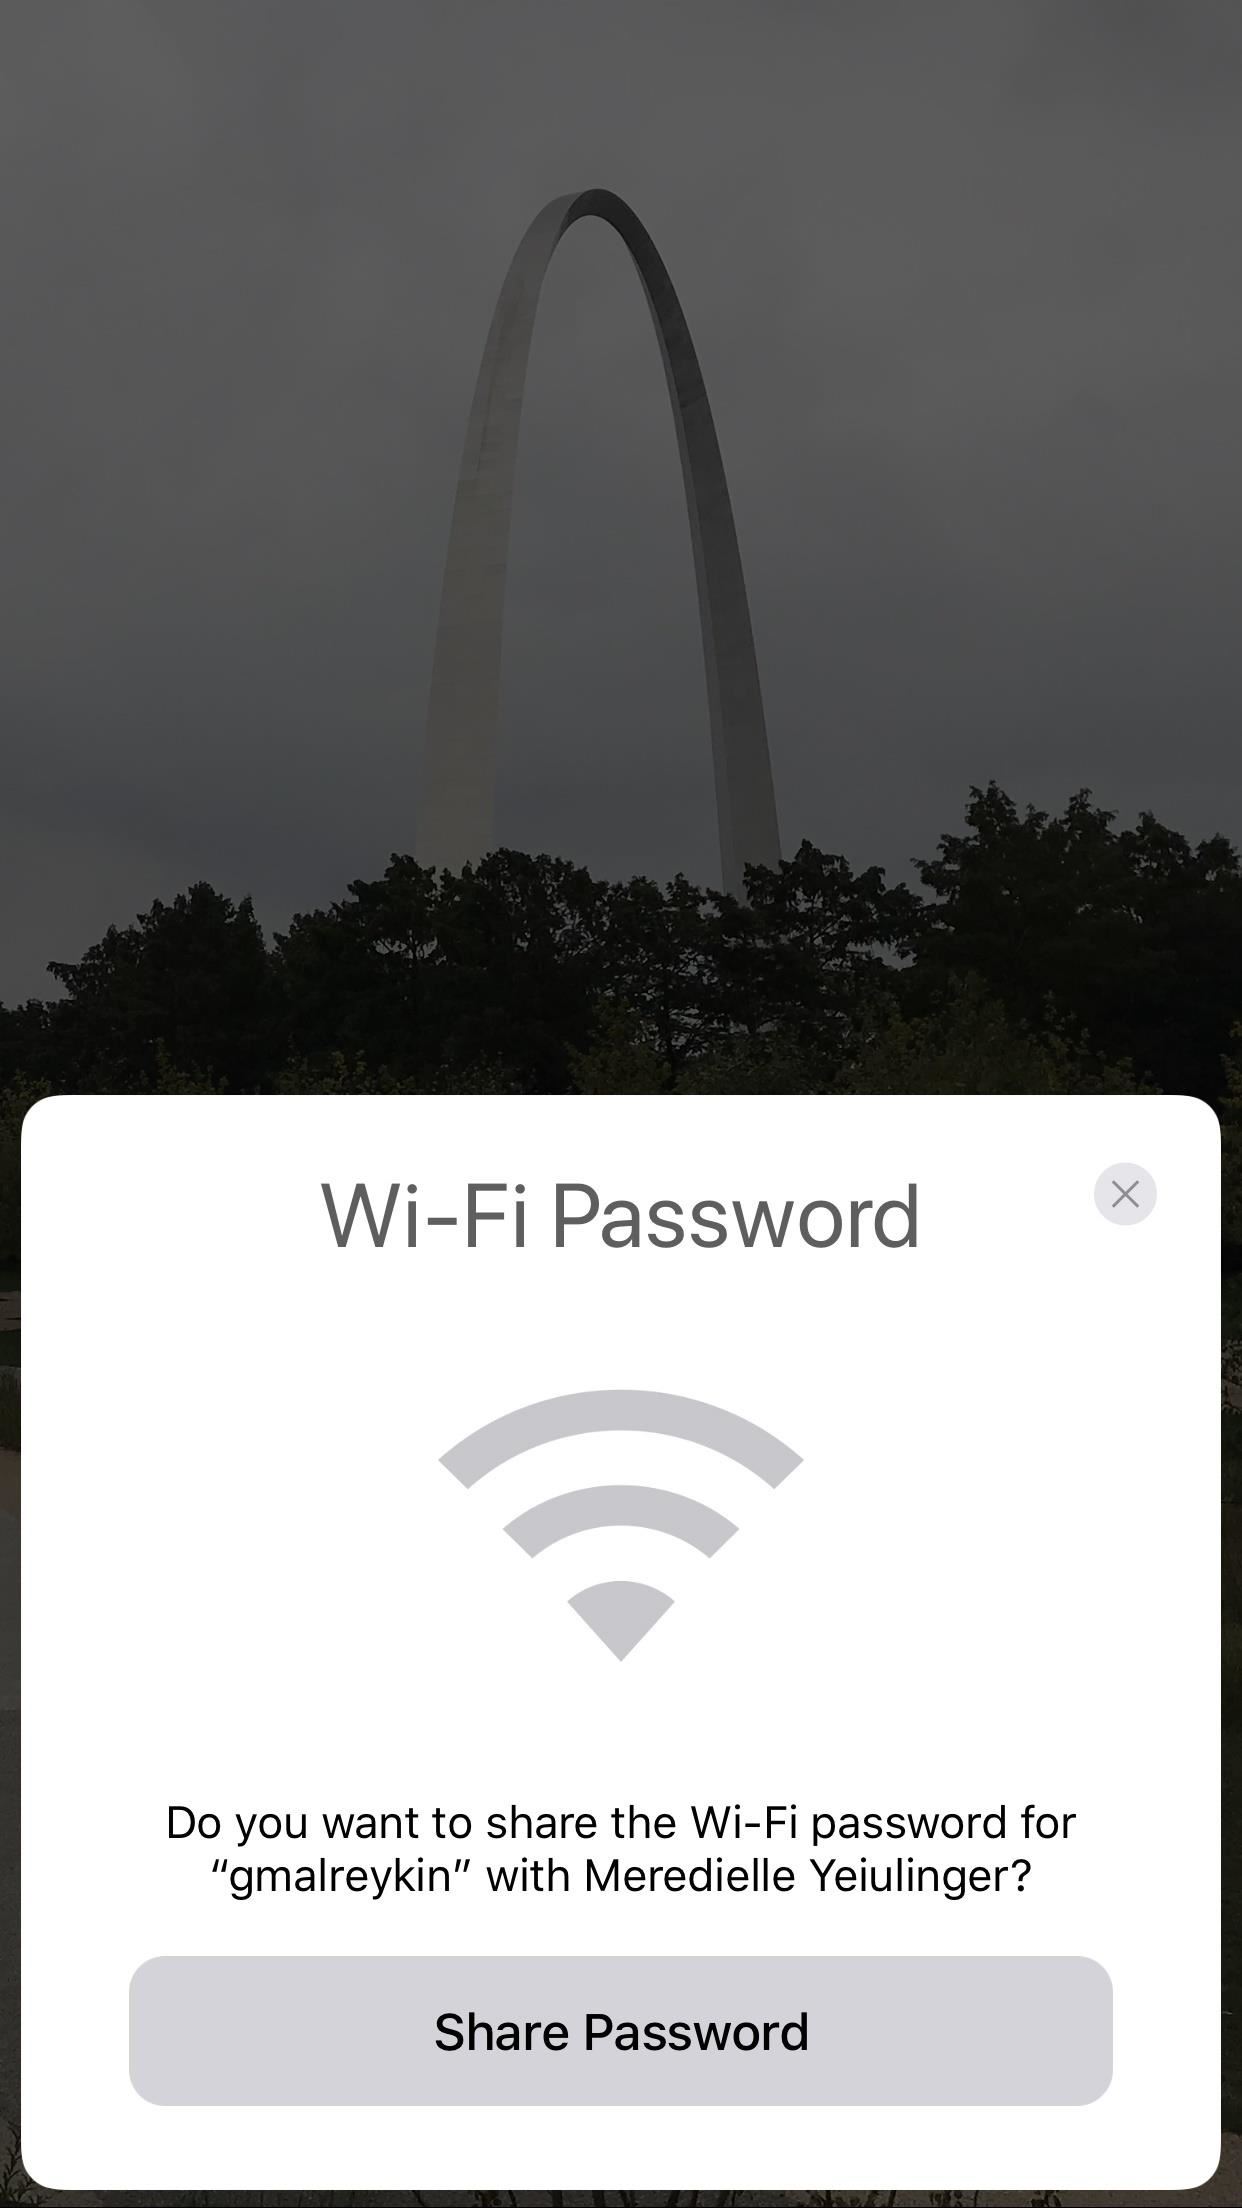 How to Instantly Share Wi-Fi Passwords from Your iPhone to Other iOS 12 Devices Nearby